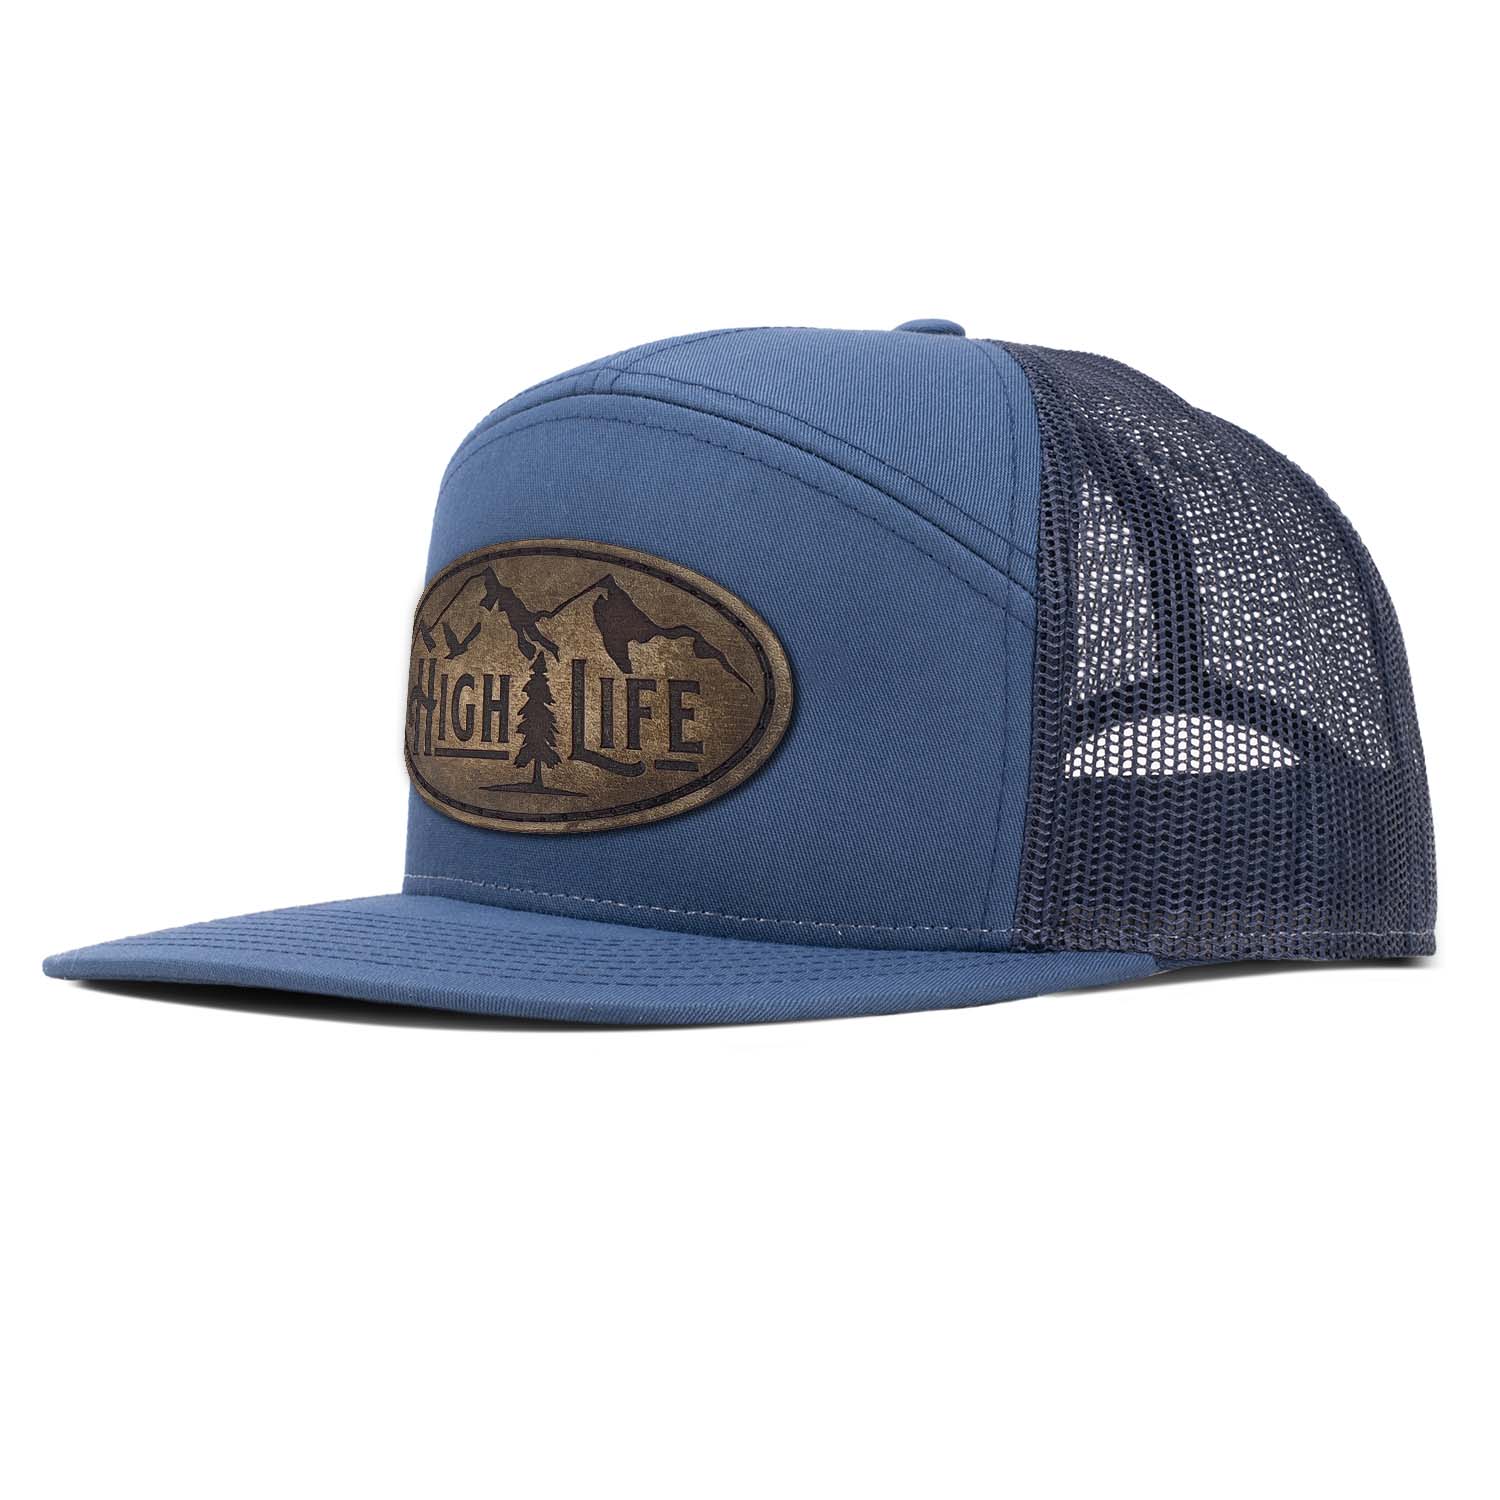 Revolution Mfg navy 7 panel trucker hat with navy mesh featuring our full grain leather vintage finish High Life patch stitched on the seamless front panel